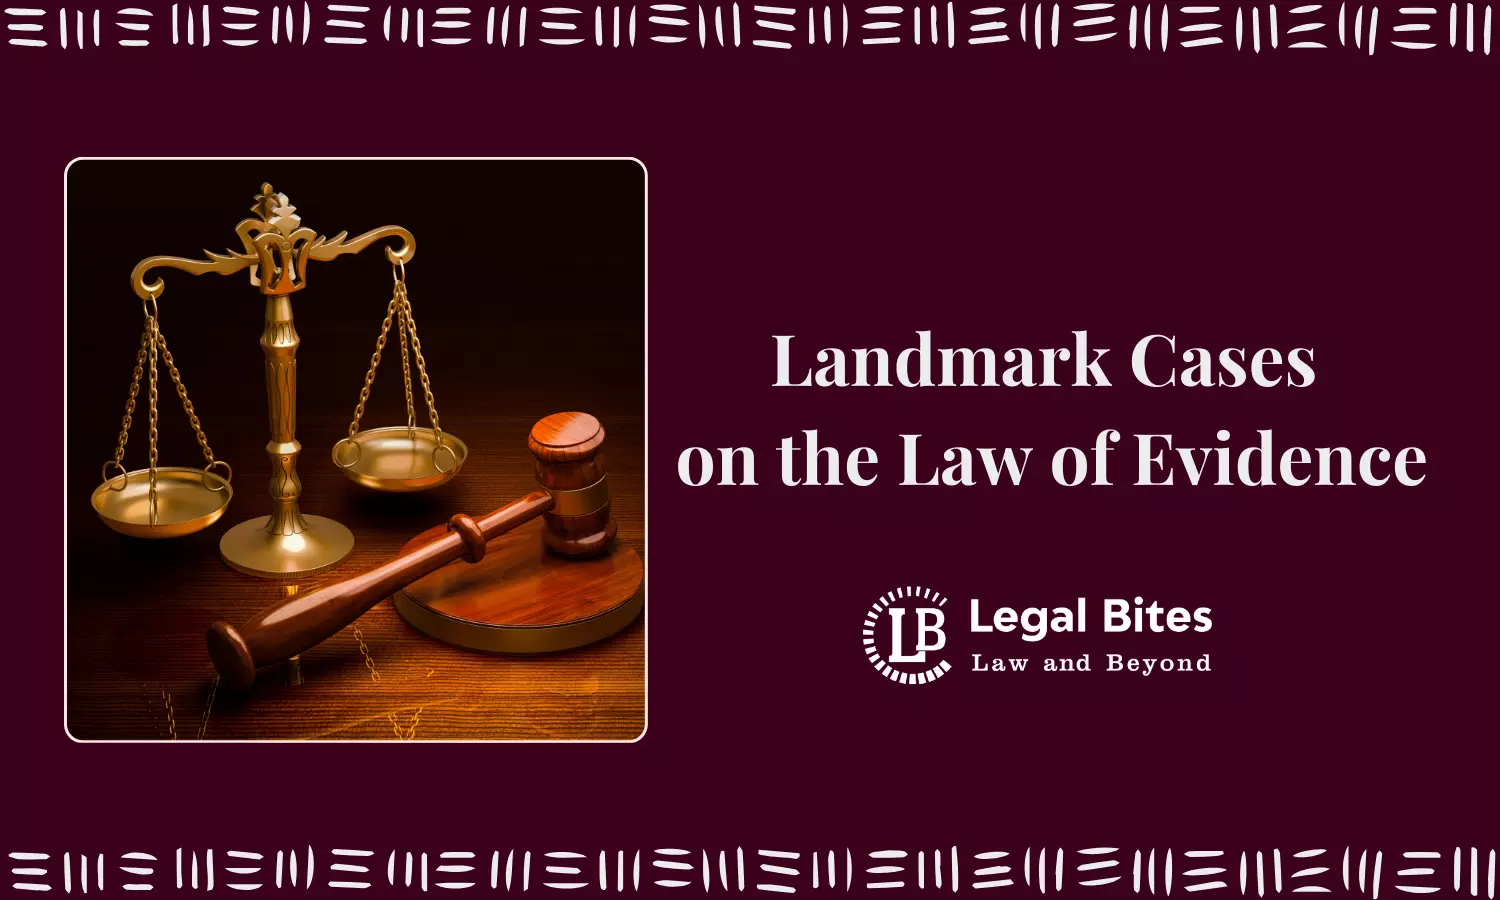 Landmark Cases on the Law of Evidence